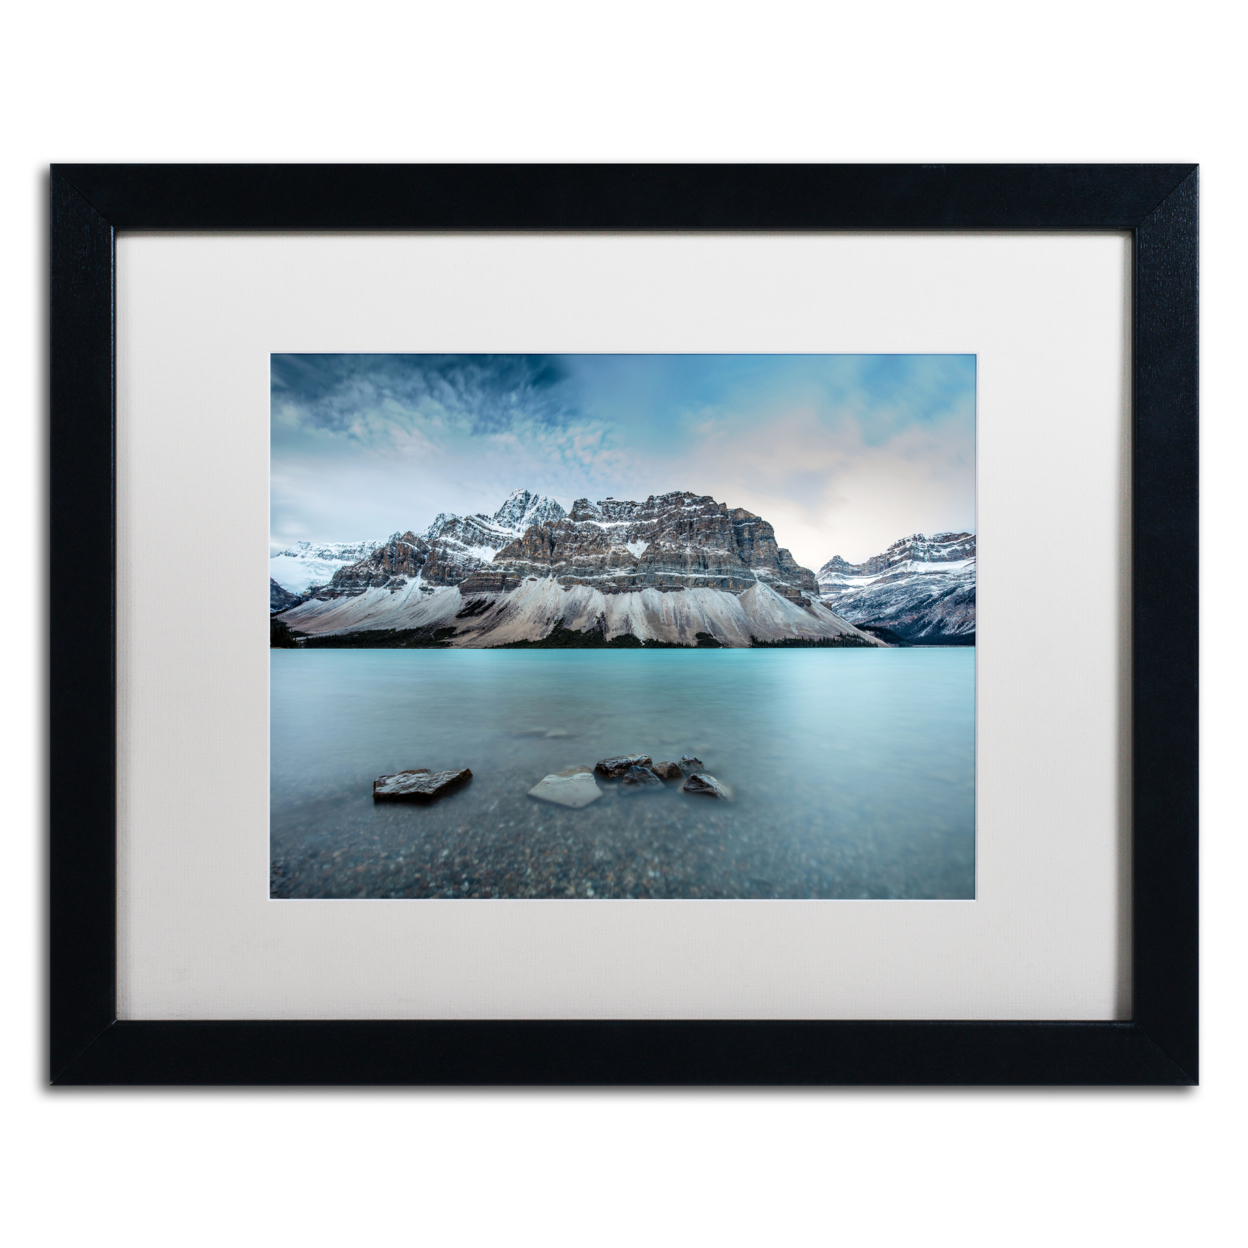 Pierre Leclerc 'Icy Blue Bow Lake' Black Wooden Framed Art 18 X 22 Inches